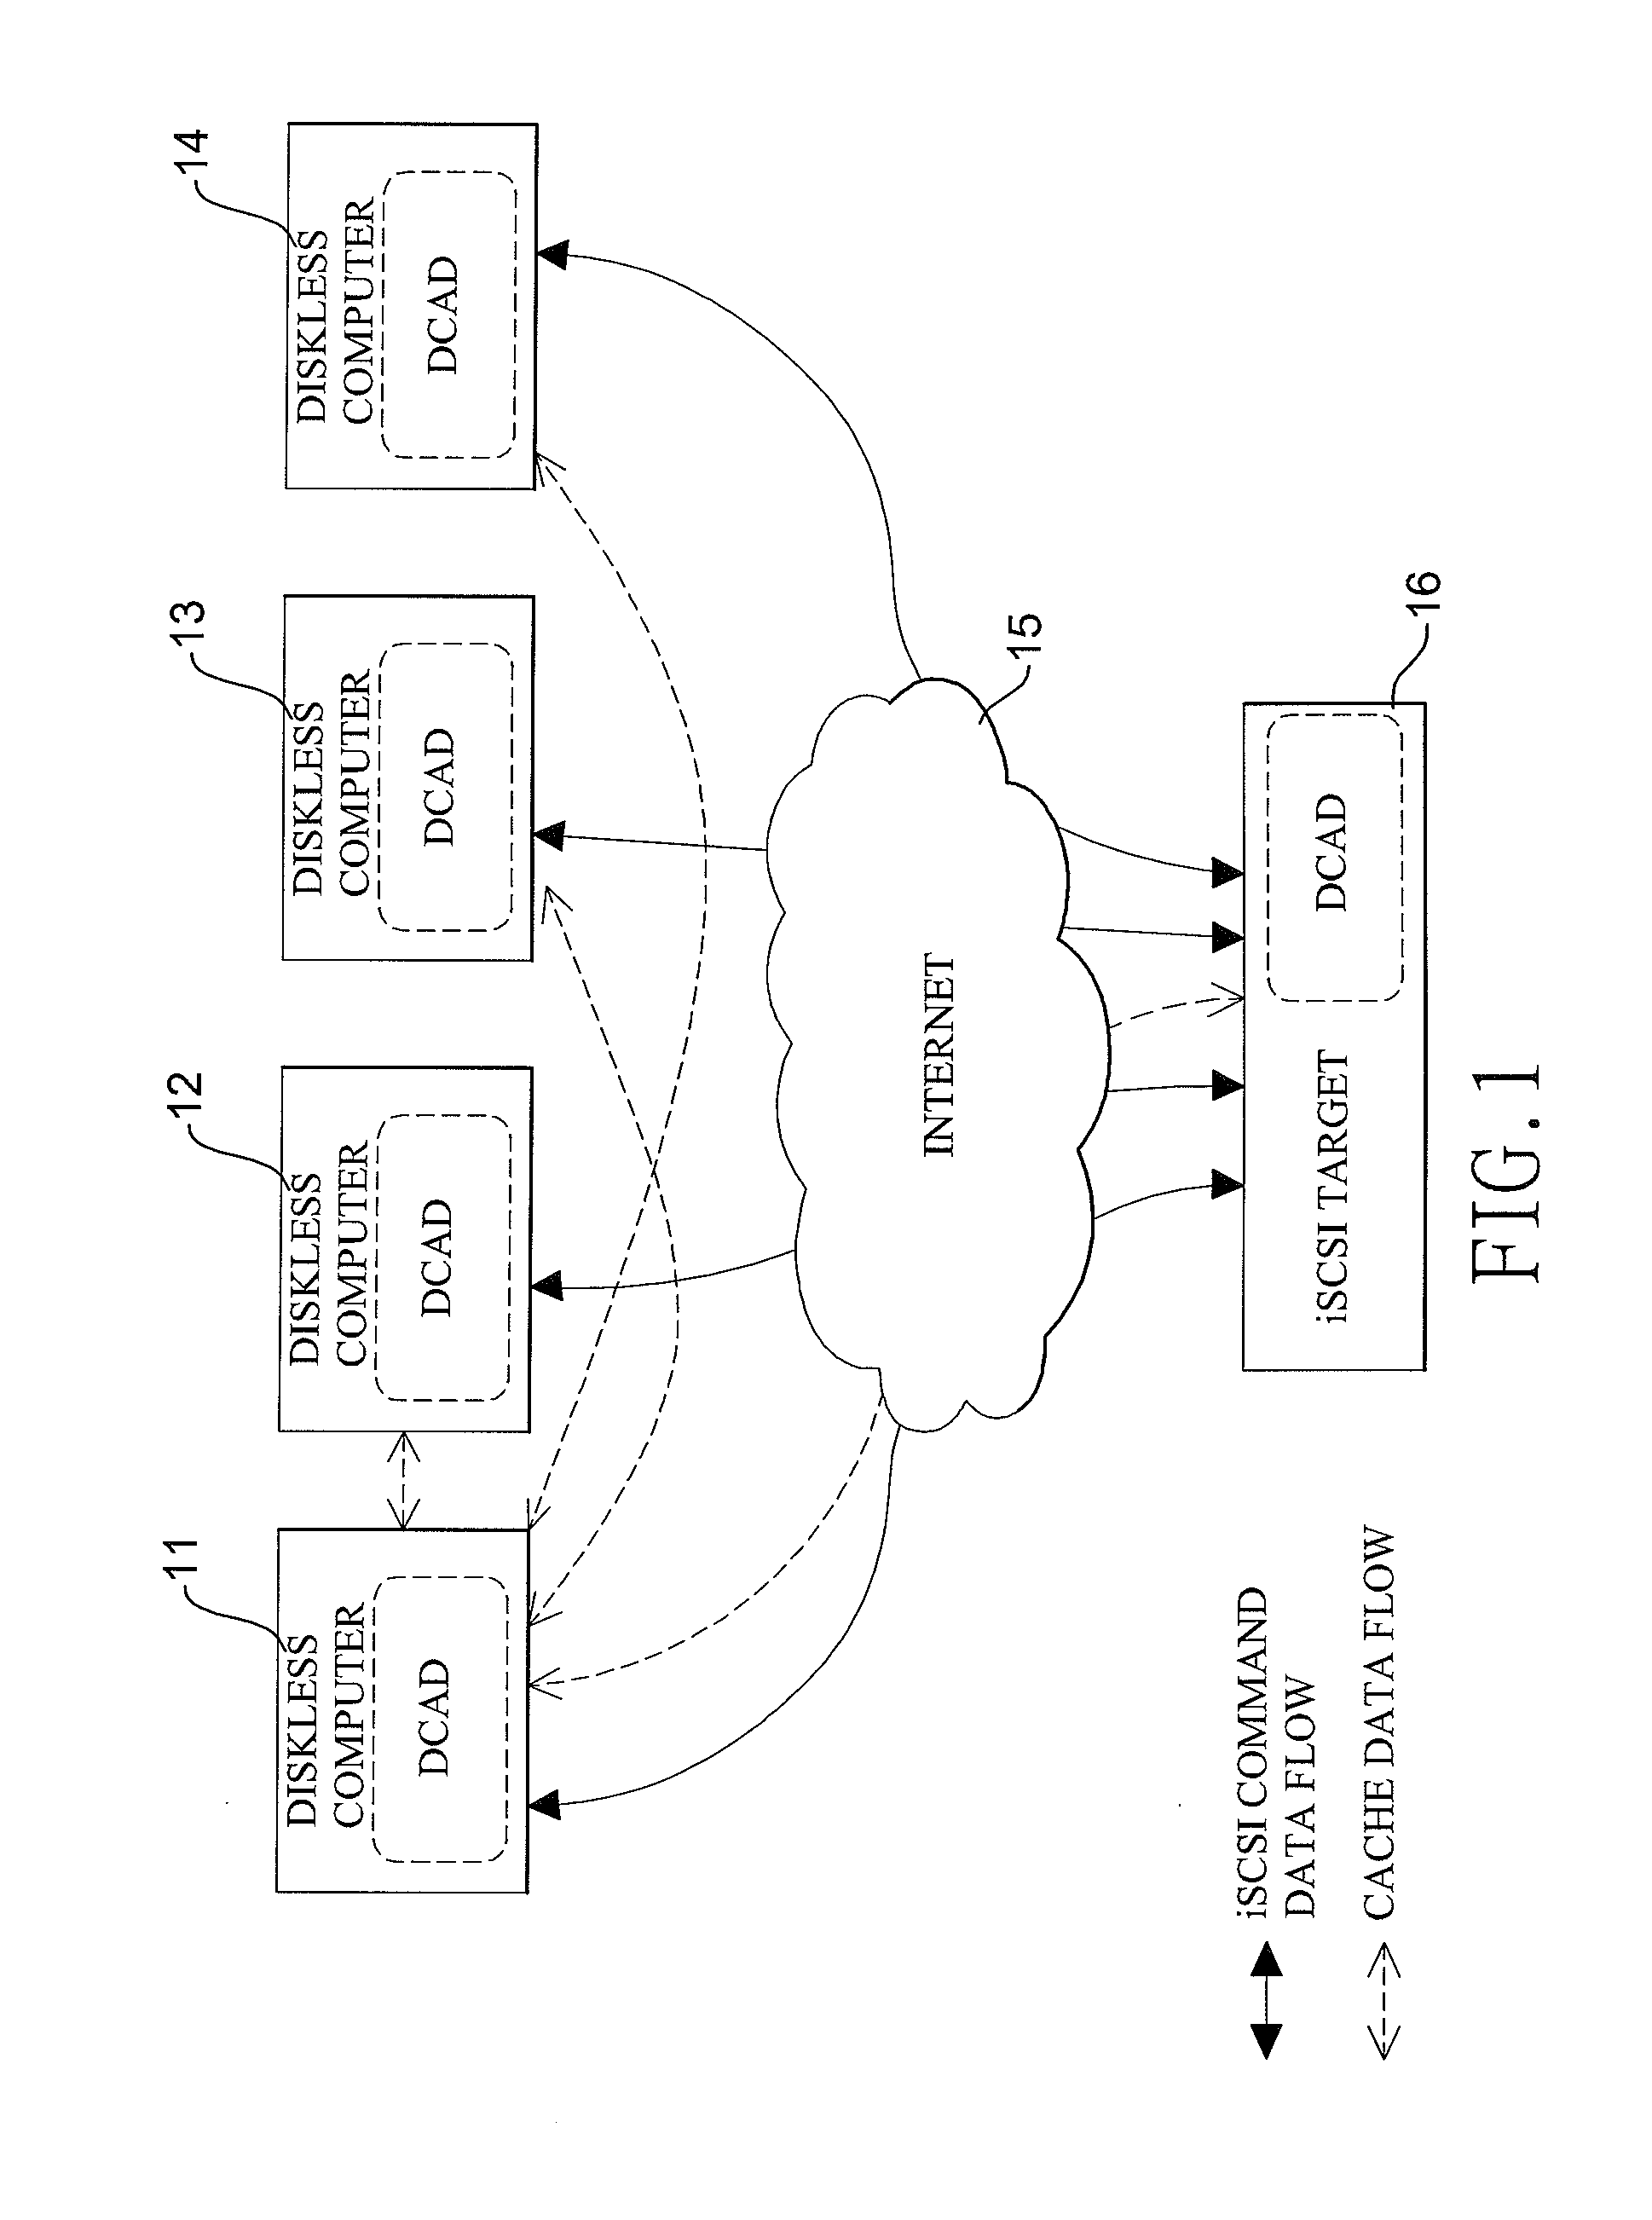 Distributive Cache Accessing Device and Method for Accelerating to Boot Remote Diskless Computers